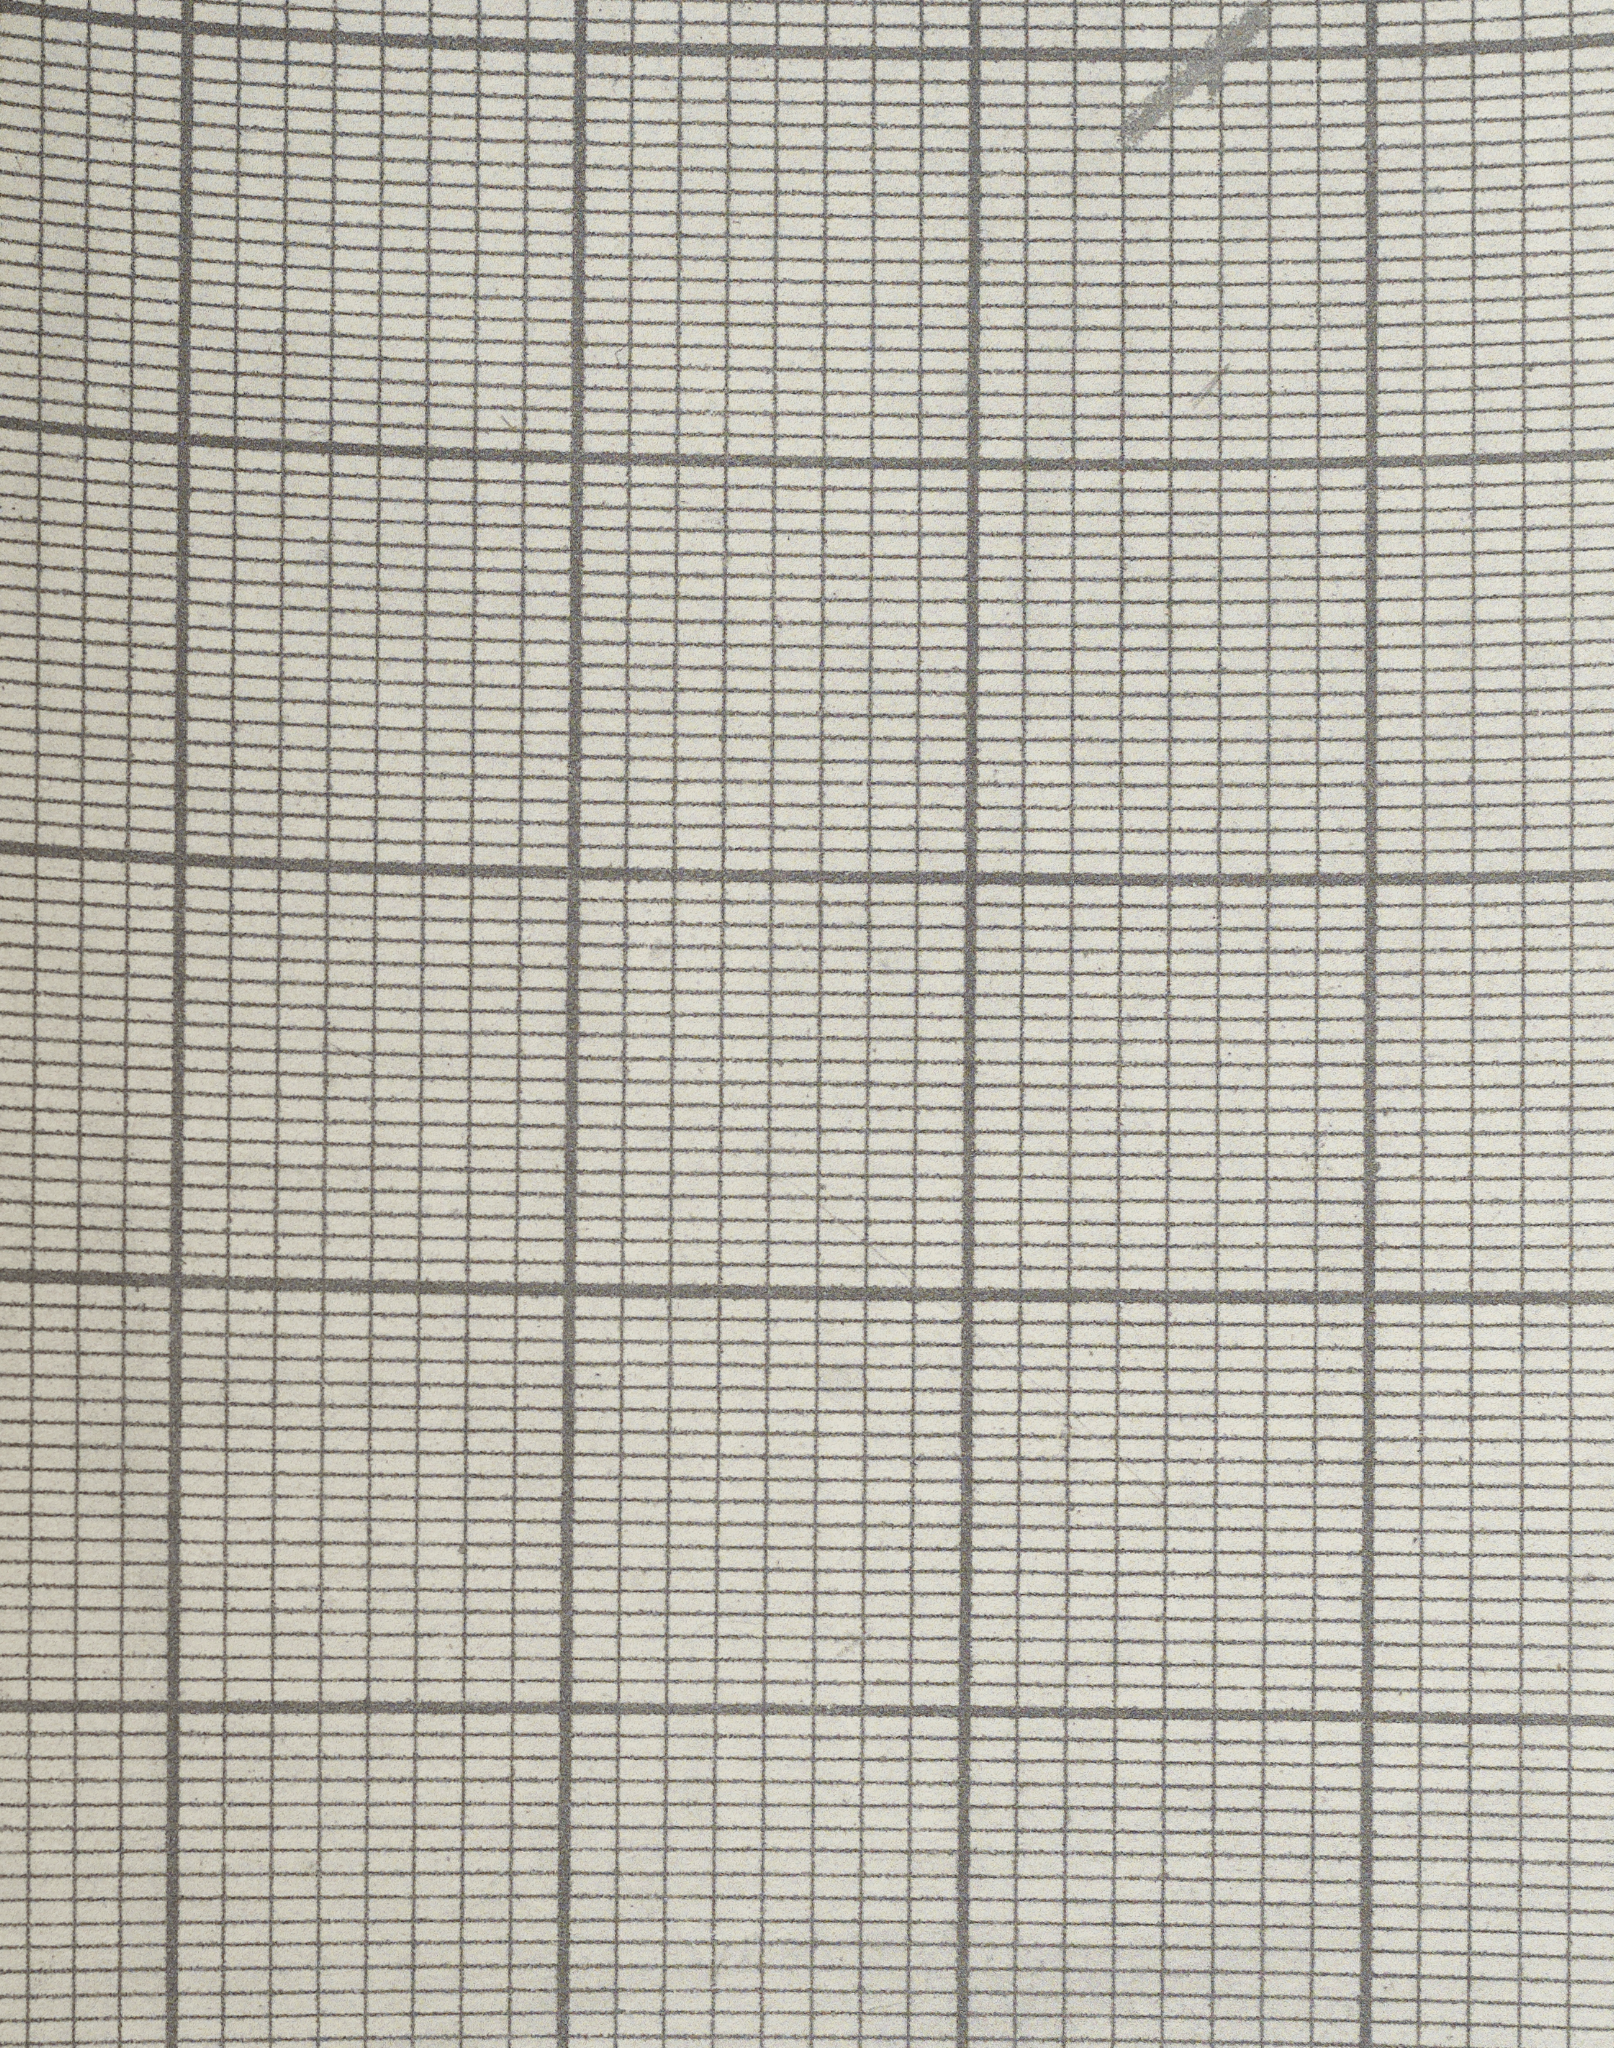 Knitting Grid Paper – The Pattern Collective